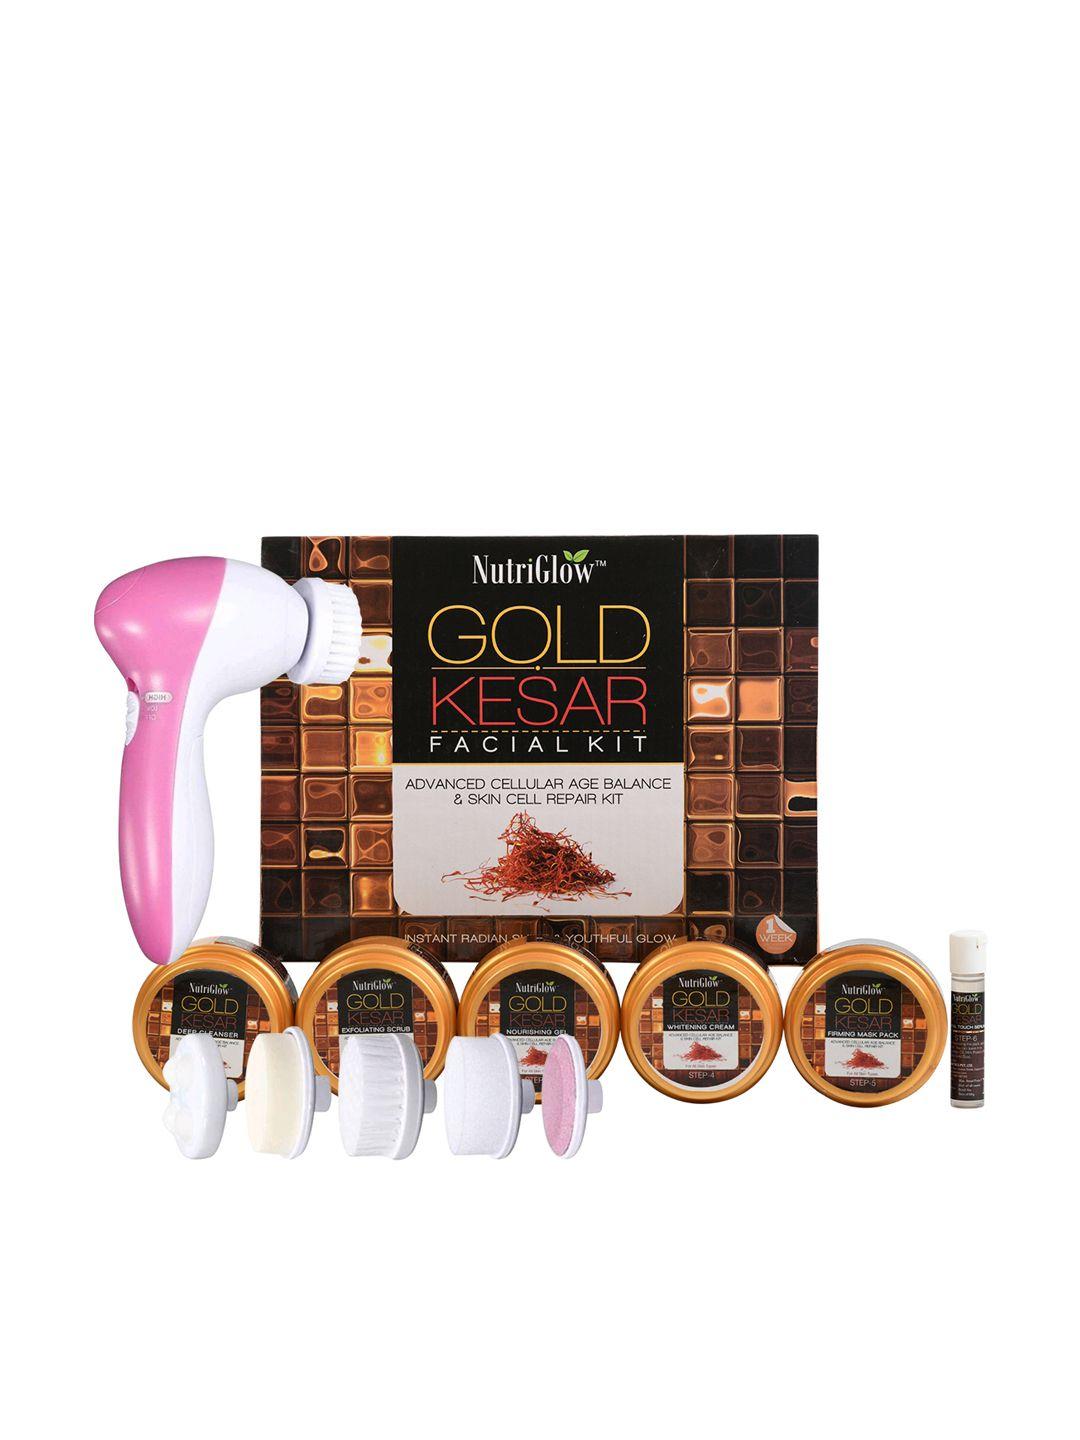 nutriglow set of gold kesar facial kit with 5-in-1 portable face massager